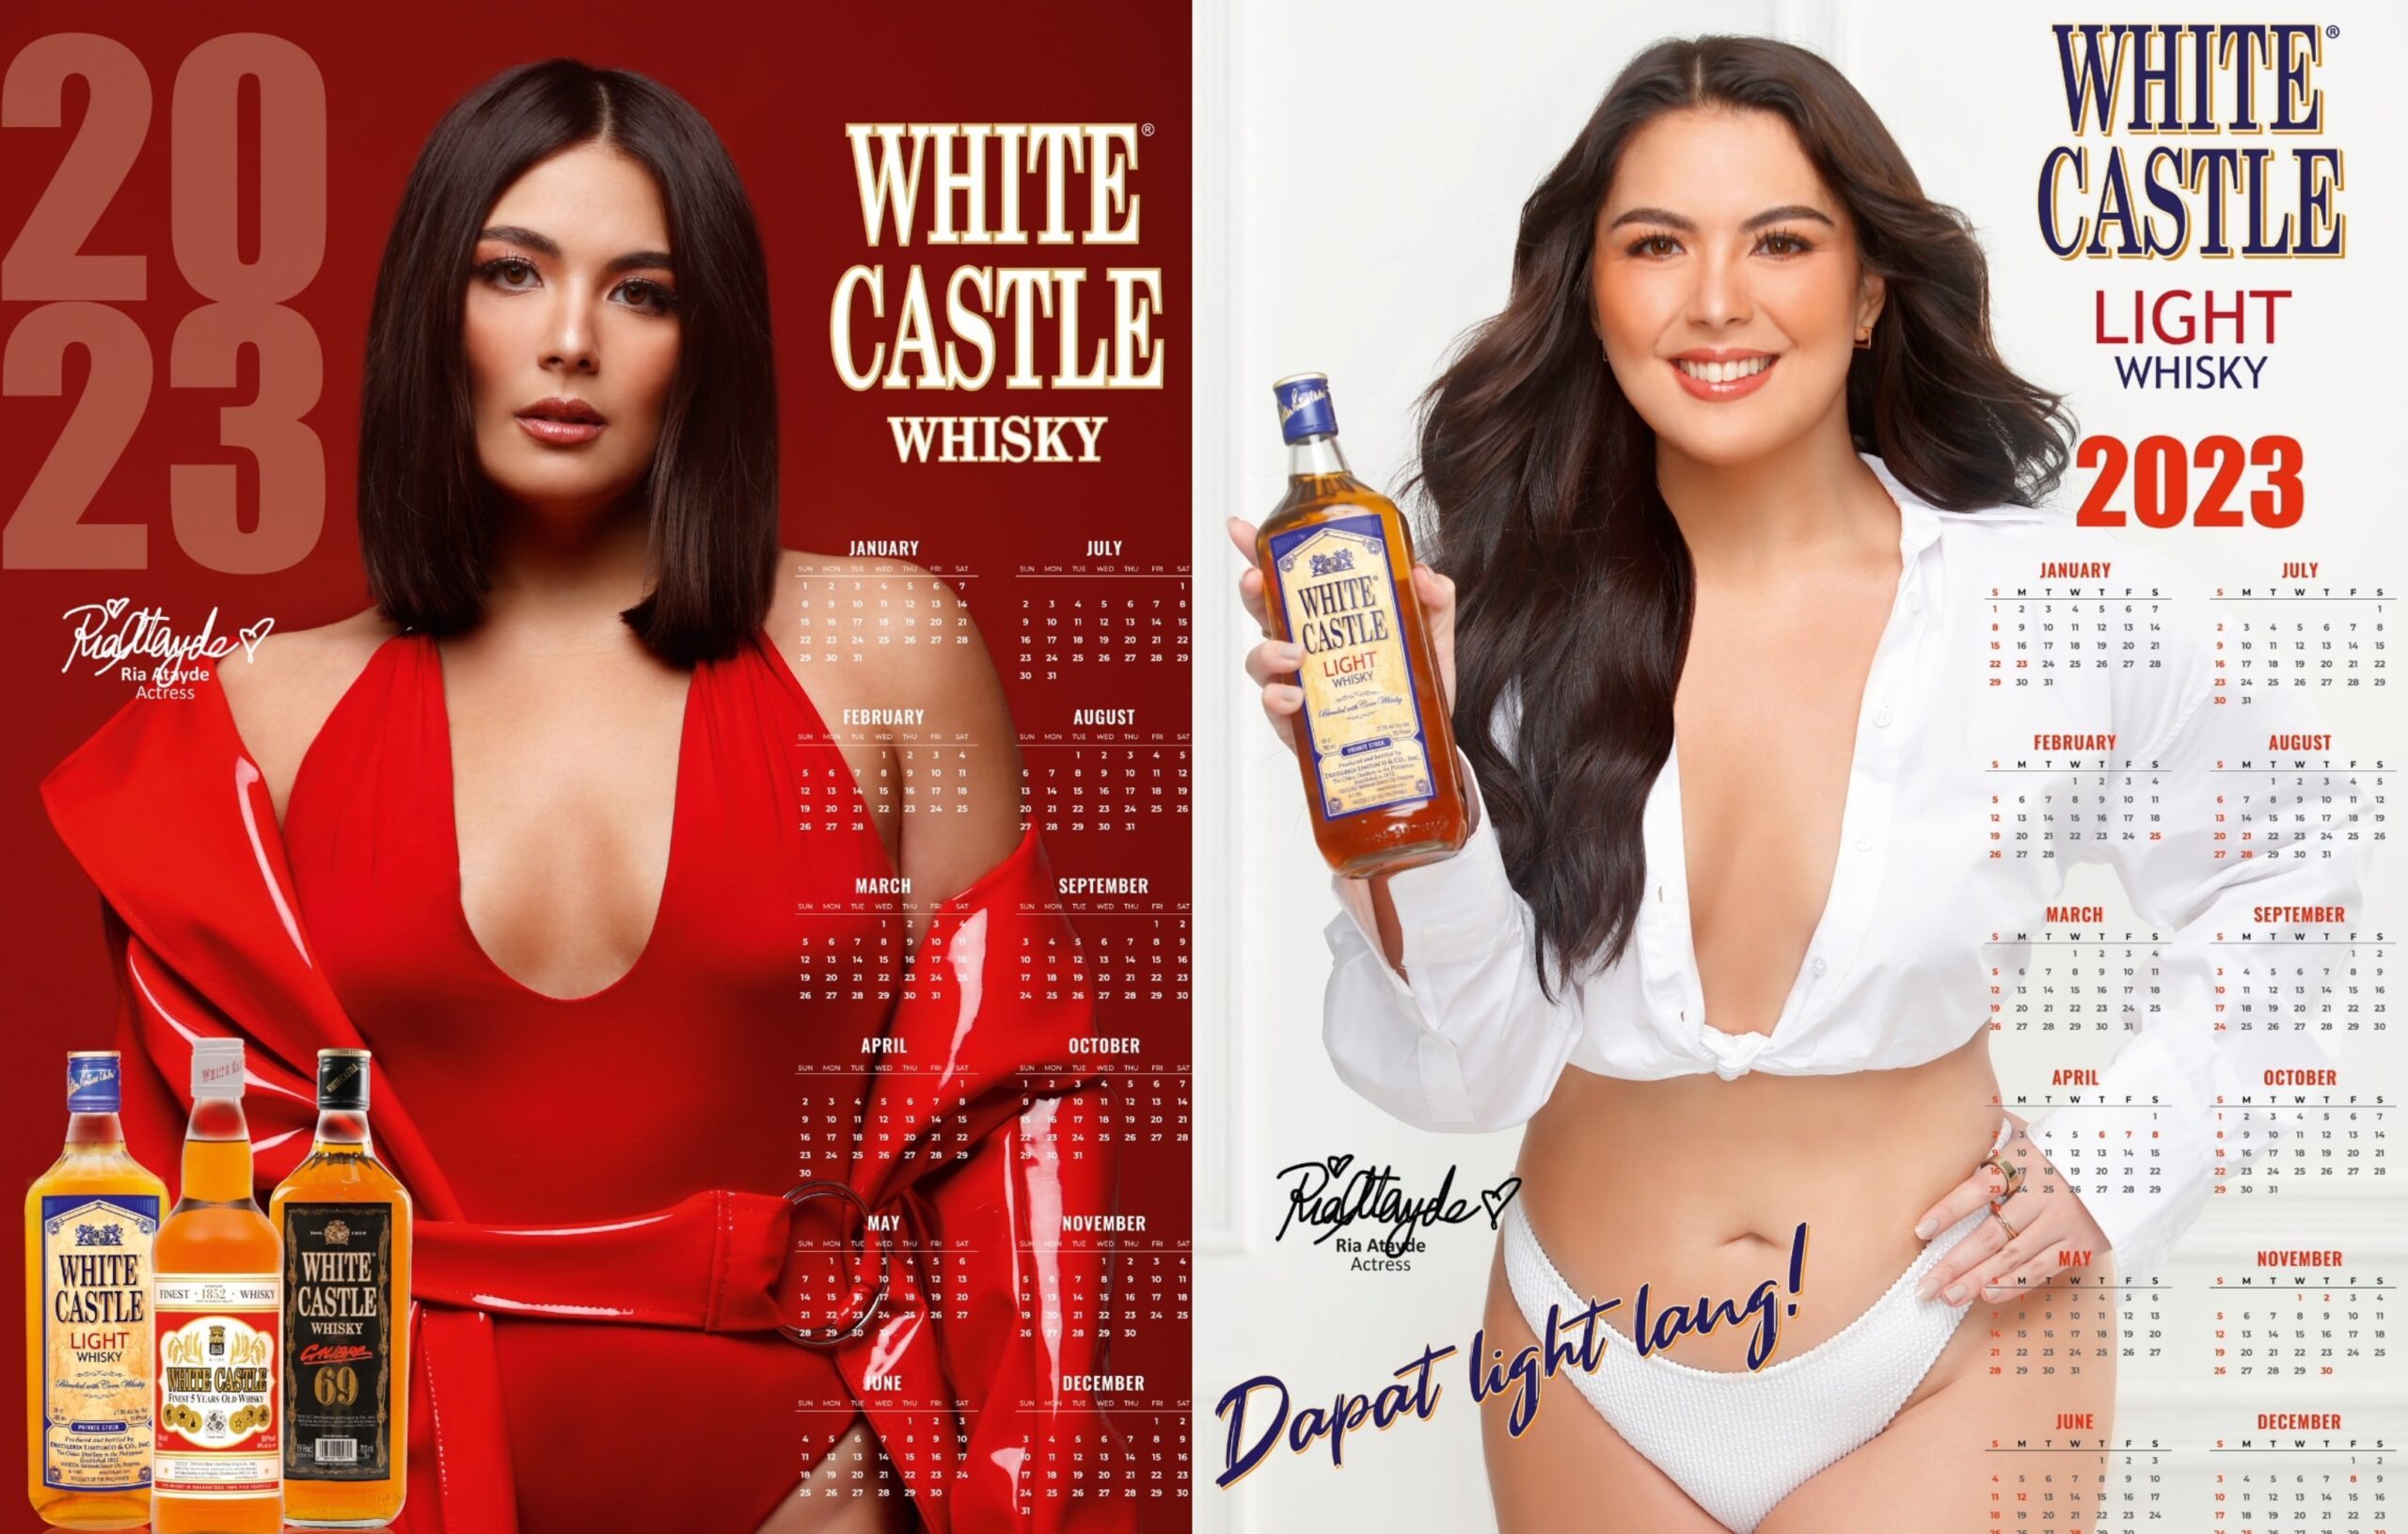 Beauty goes in all forms and sizes : Ria Atayde is White Castle Whisky